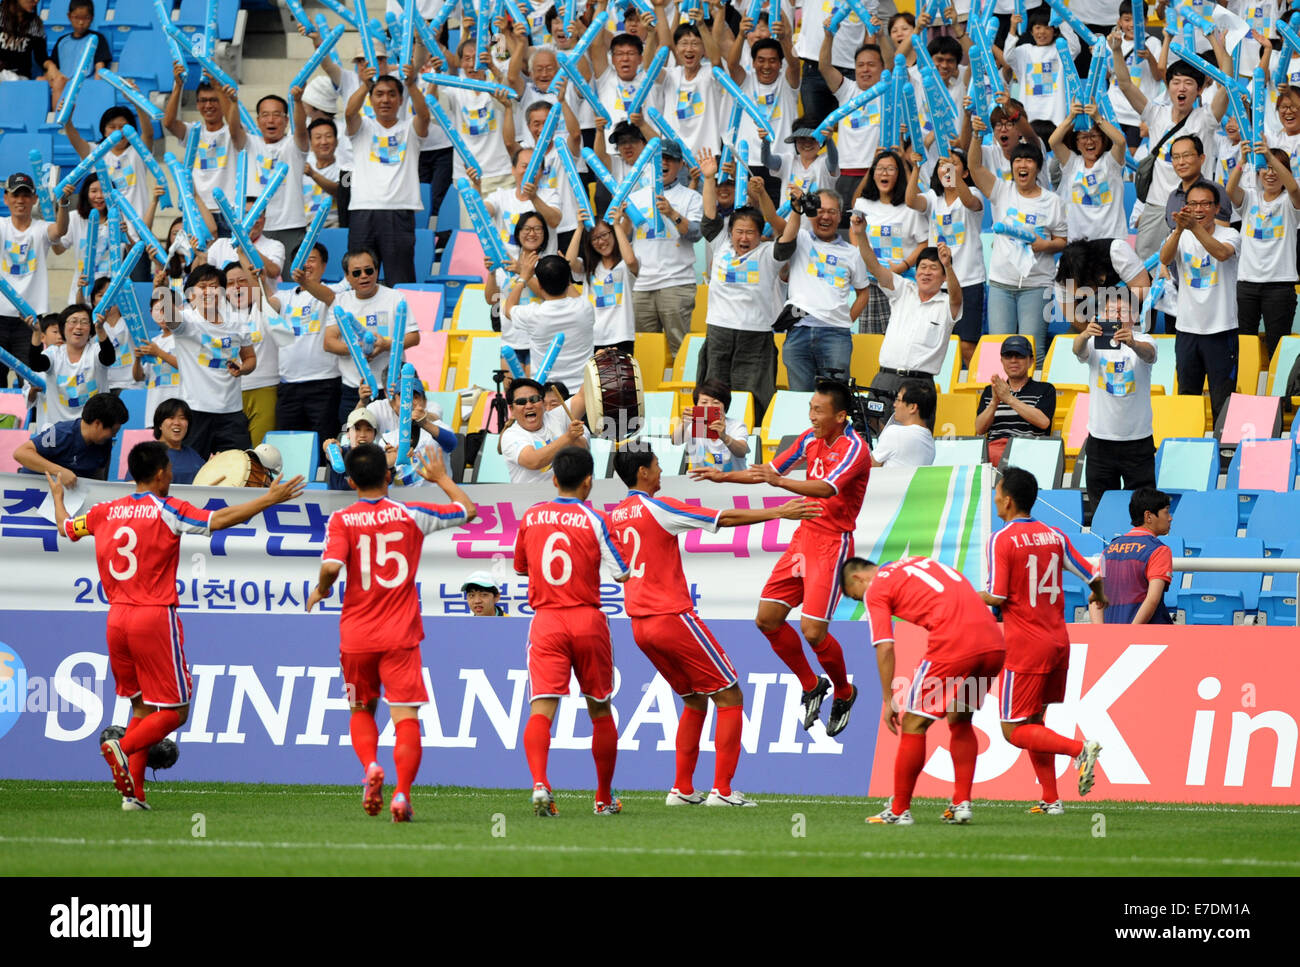 Incheon, South Korea. 15th Sep, 2014. Players of Democratic People's Republic of Korea (DPRK) celebrate for a goal during the men's football first round group F match against China at the 17th Asian Games in Incheon, South Korea, on Sept. 15, 2014. © Lo Ping Fai/Xinhua/Alamy Live News Stock Photo